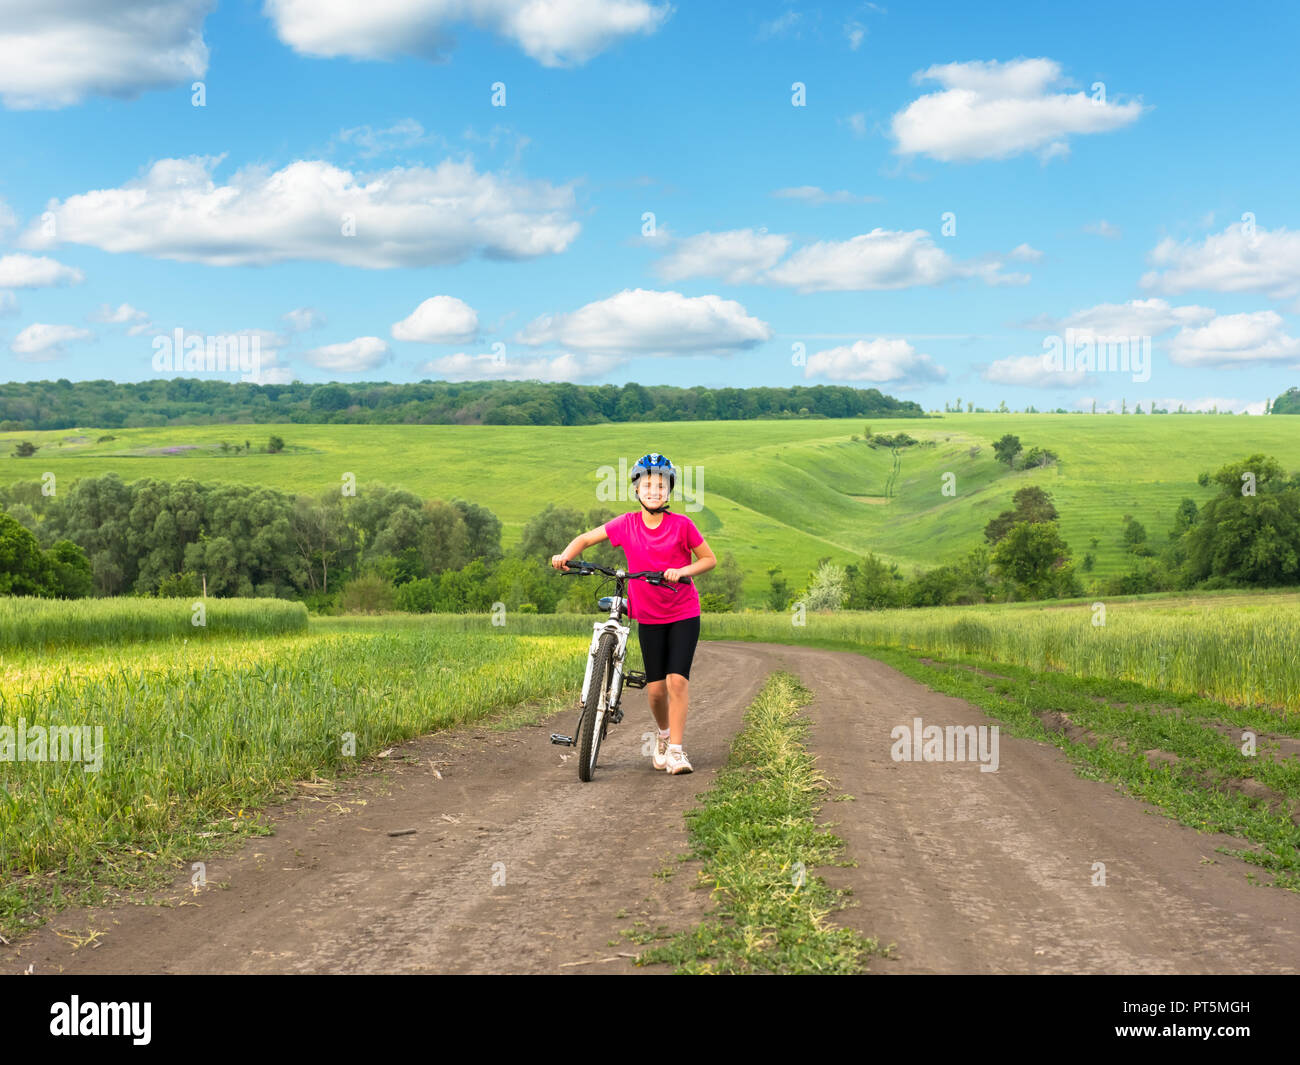 girl on a bicycle in rural landscape Stock Photo